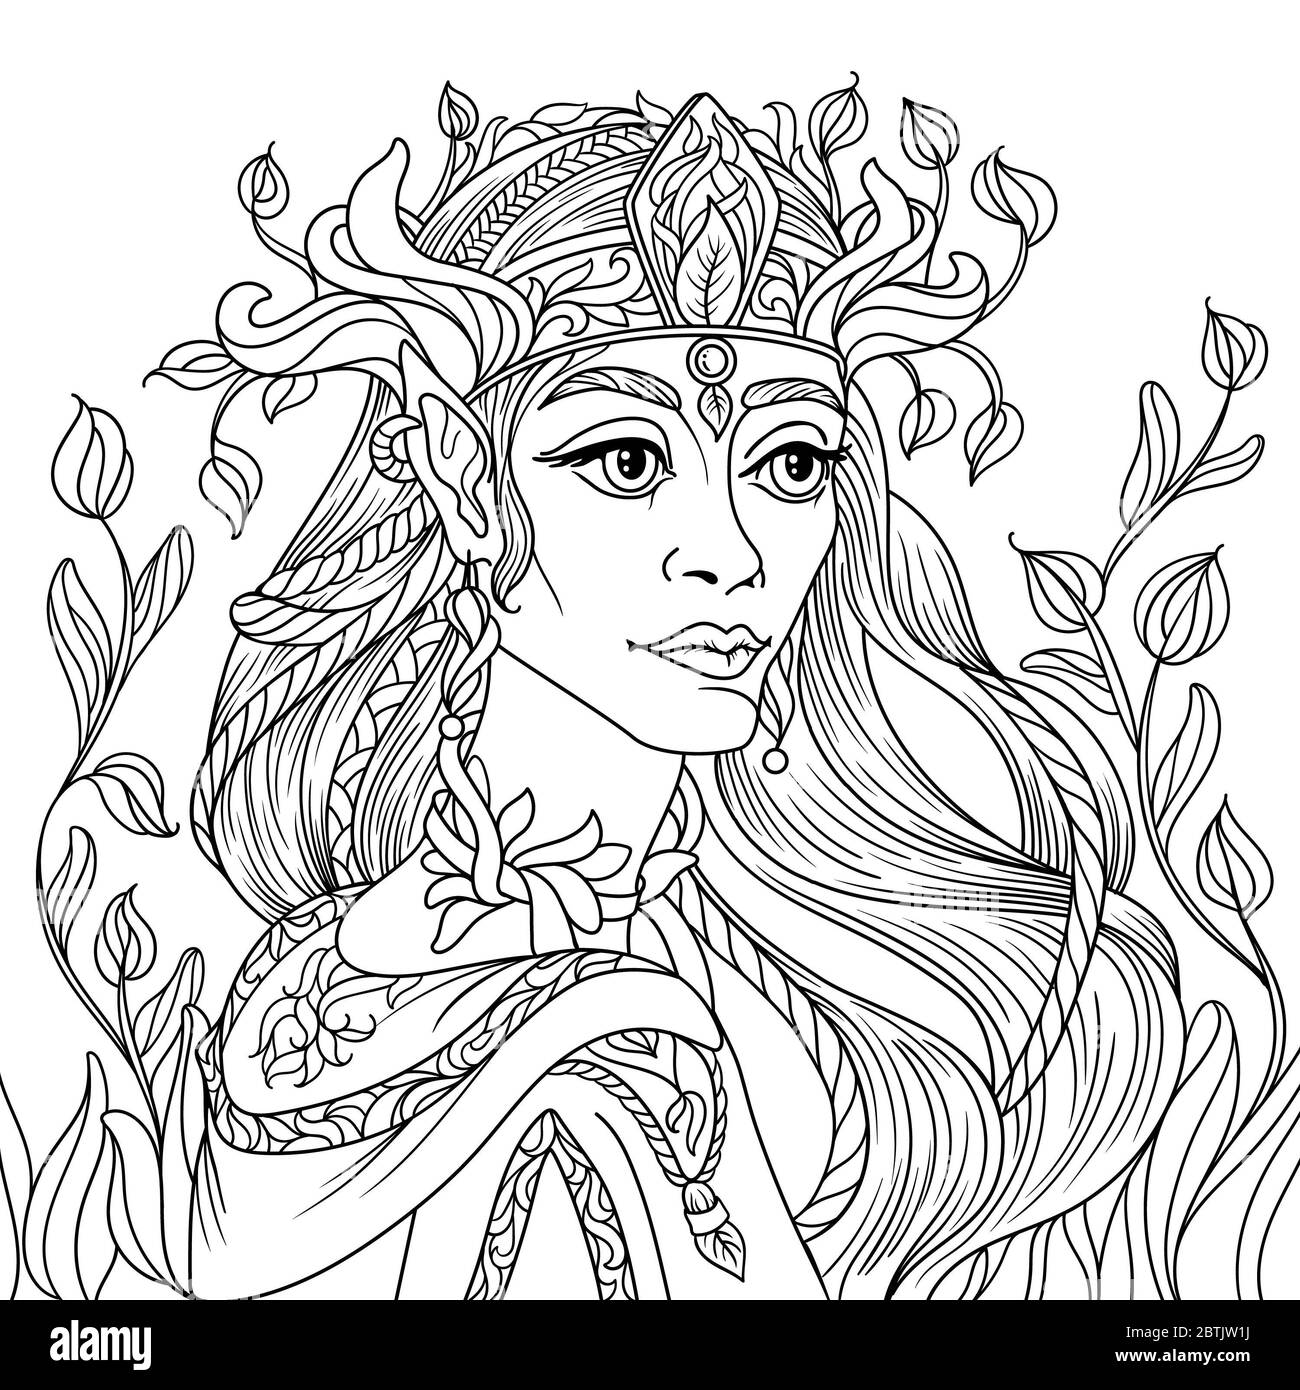 Zentangle fantasy coloring page for adults anti stress with beautiful girl elf  face with black and white background Stock Photo